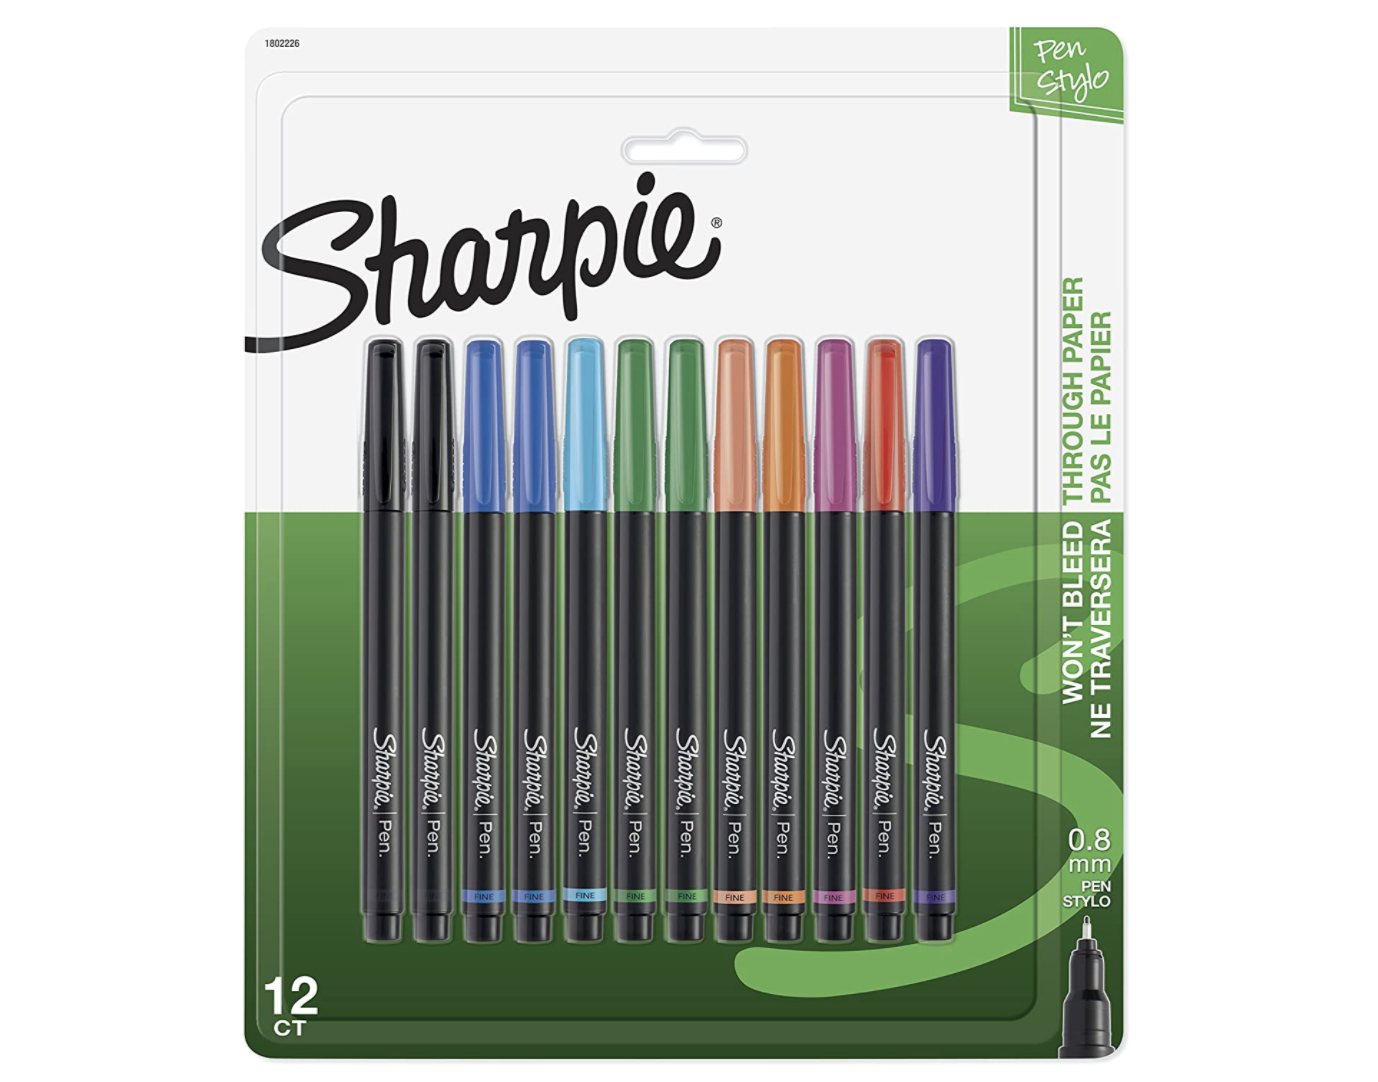 https://karleyhall.com/wp-content/uploads/2021/02/Sharpies-Pens-with-Cricut-Machine-Karley-Hall.png